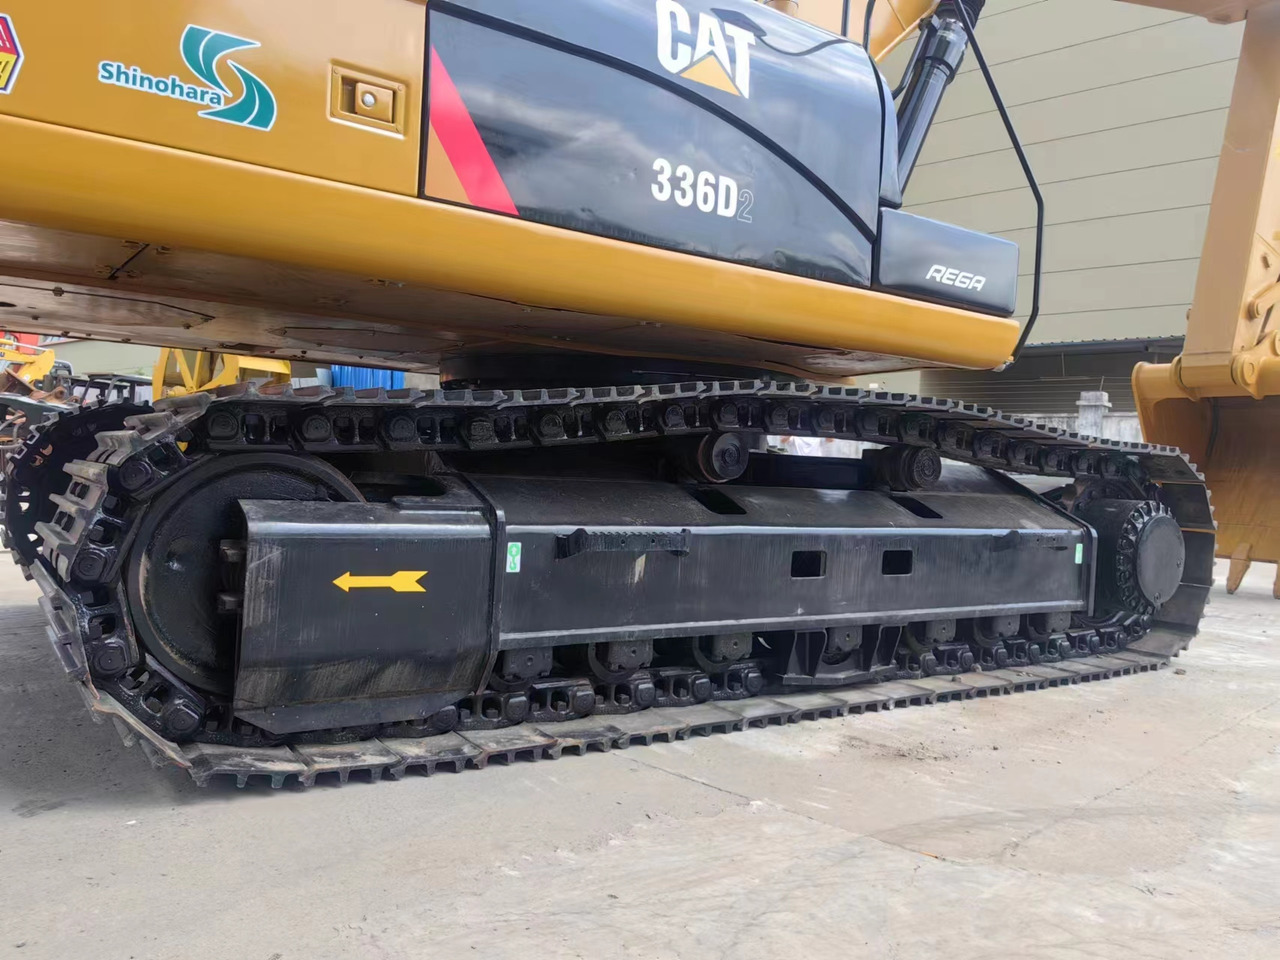 Crawler excavator 95%new Original Japan made CATERPILLAR Cat 336D2, Large engineering construction machinery good condition in stock hot selling !!!: picture 17